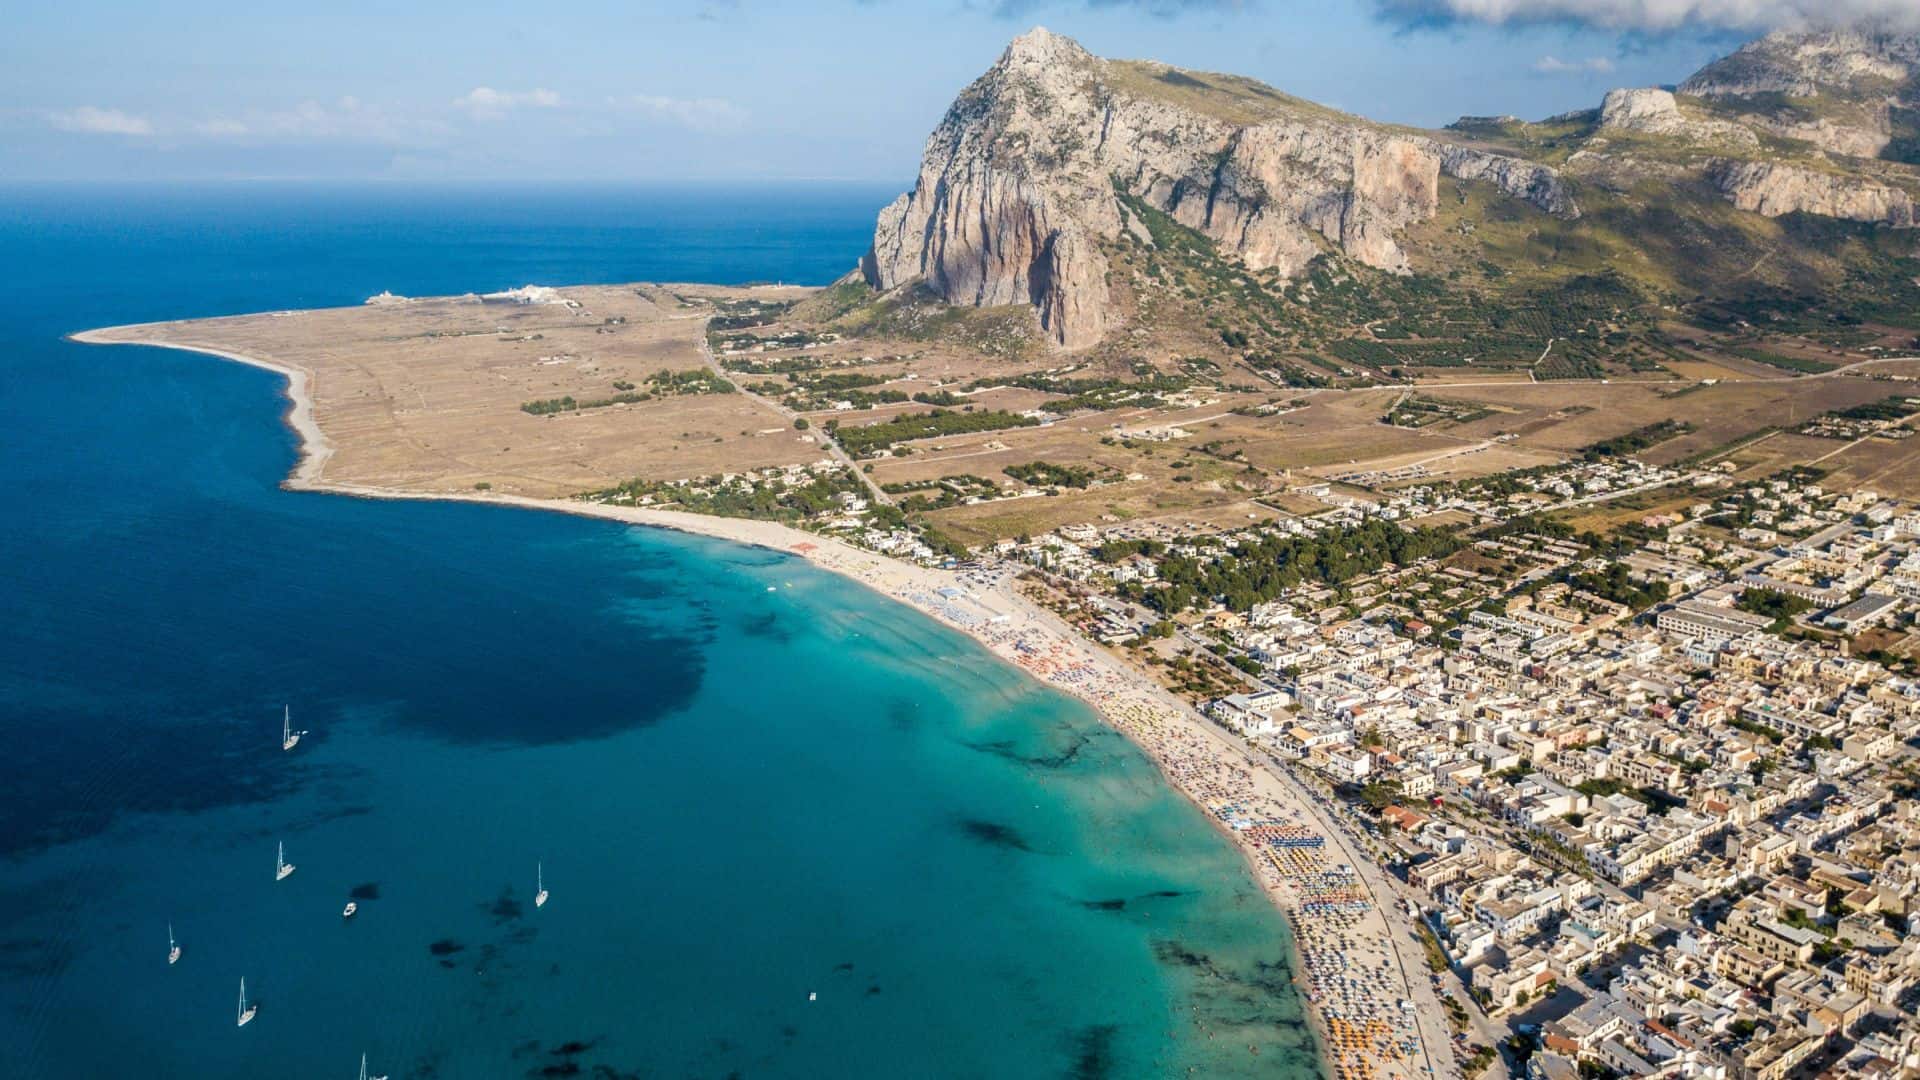 View from above of San Vito lo Capo